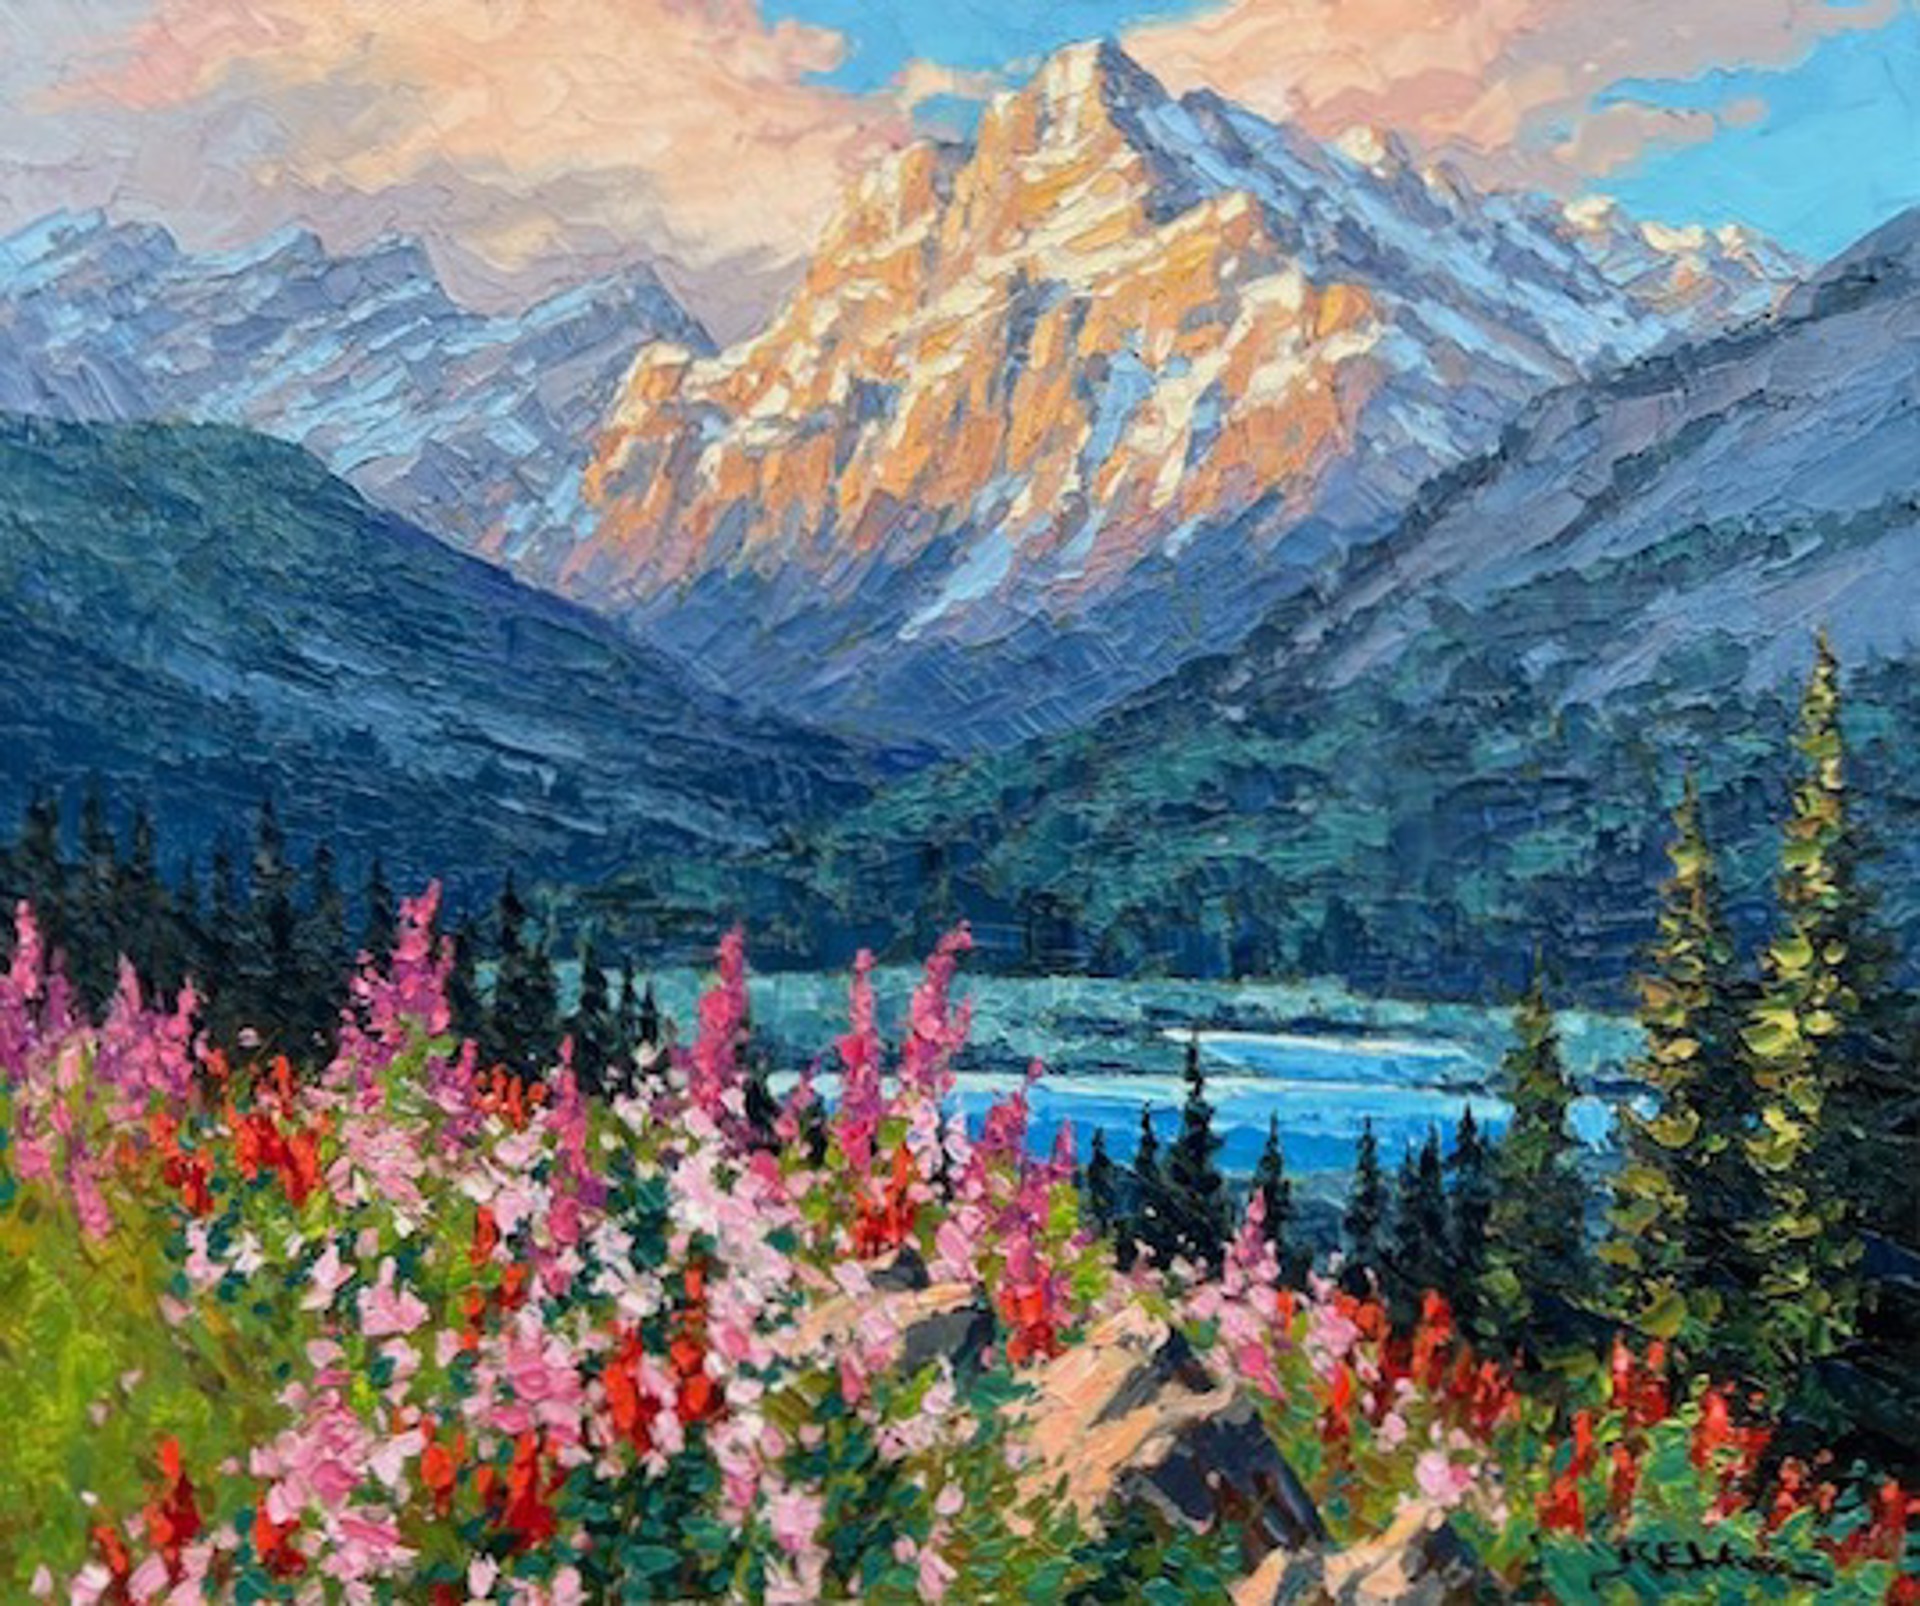 Wildflowers and Mount Kidd by Robert E Wood